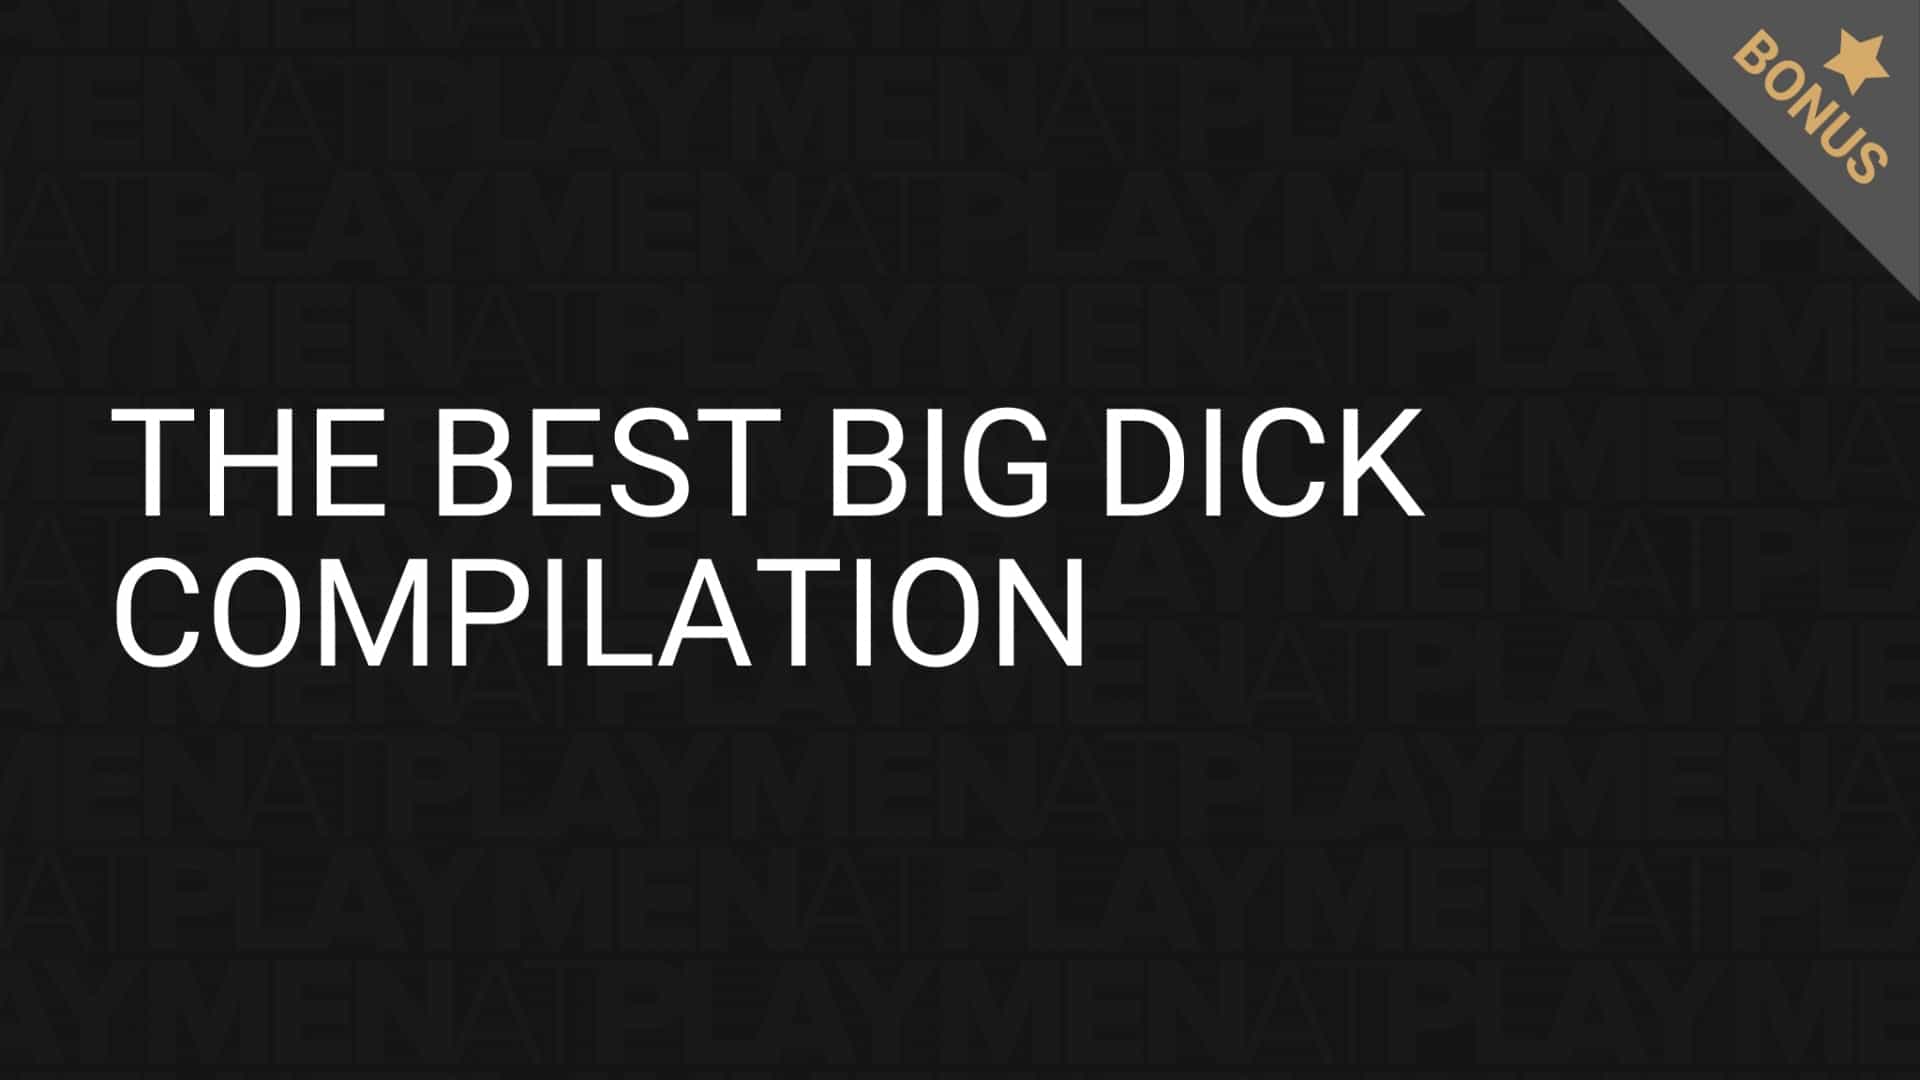 The Best Big Dick Compilation